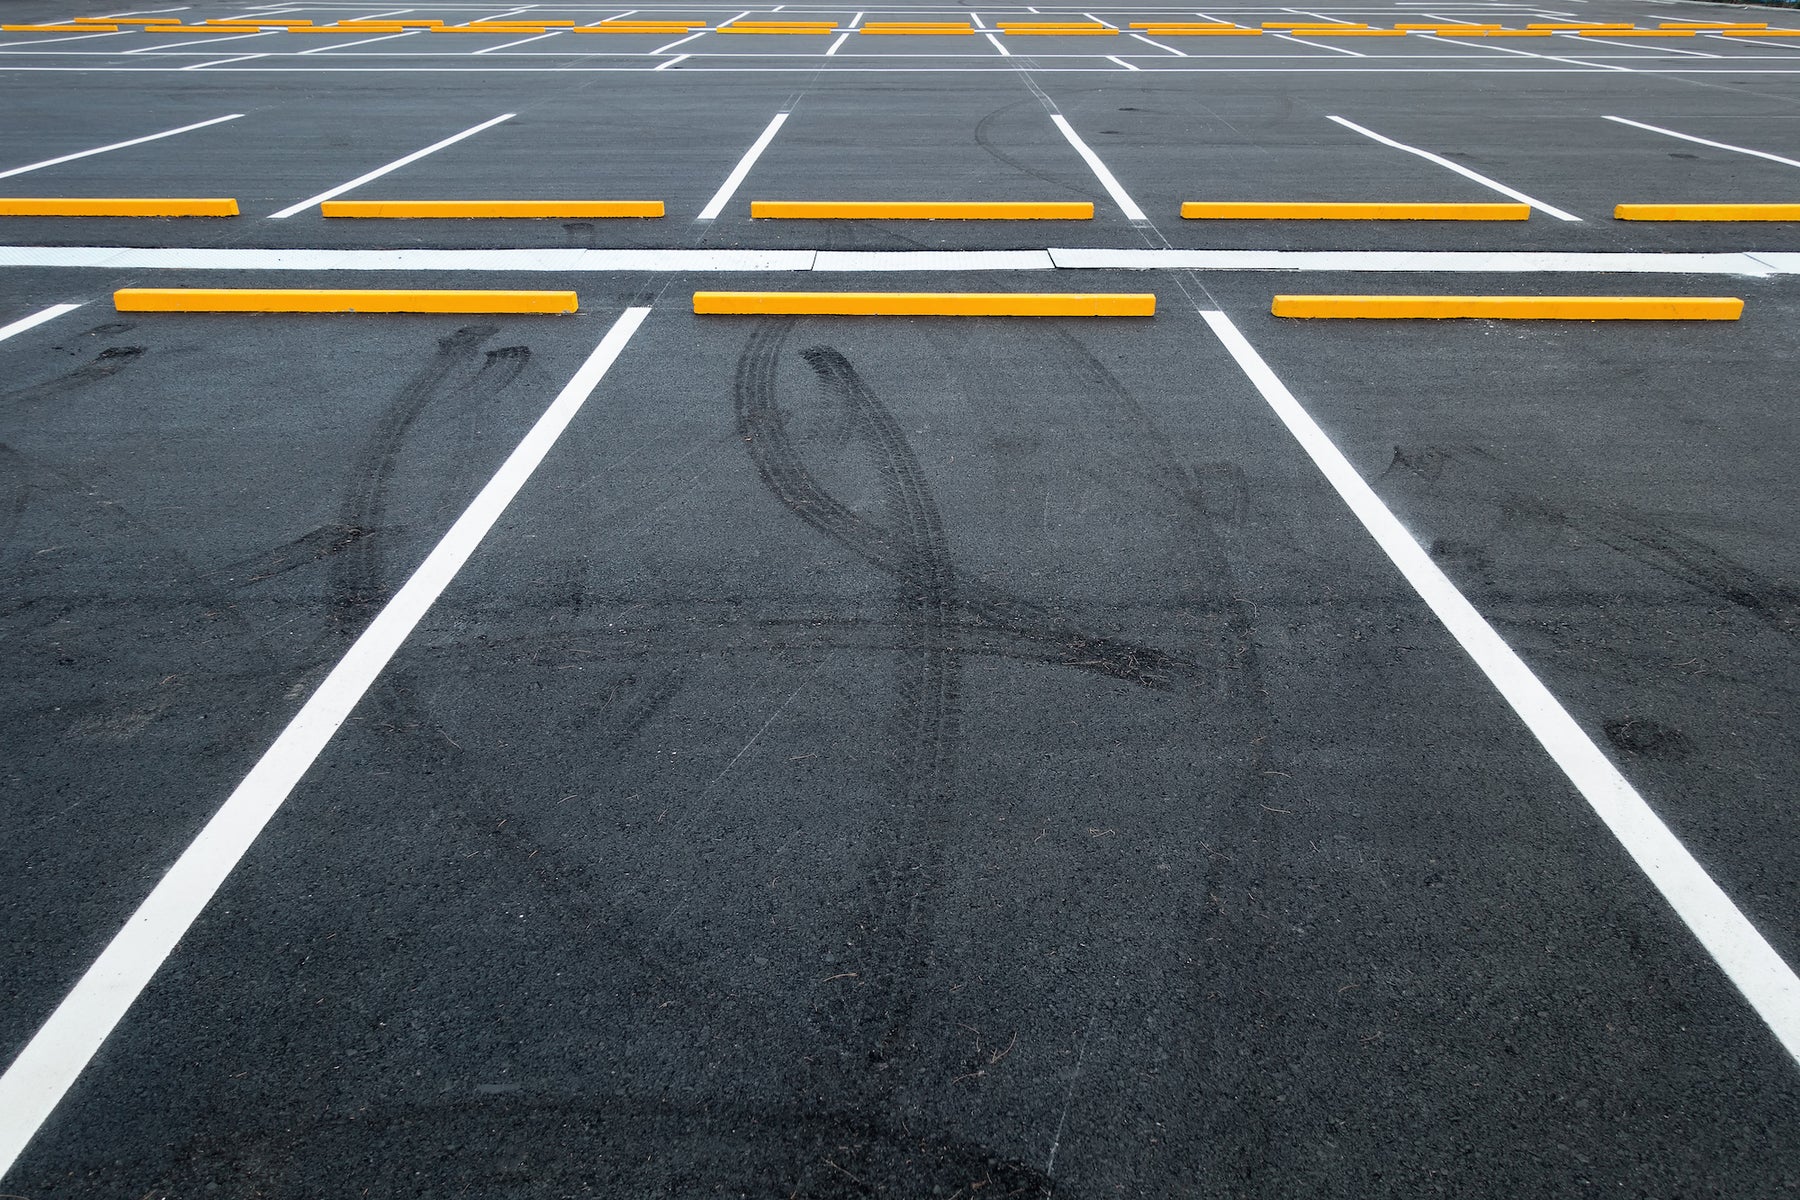 Choosing the Best Paint for Parking Lots and Roads